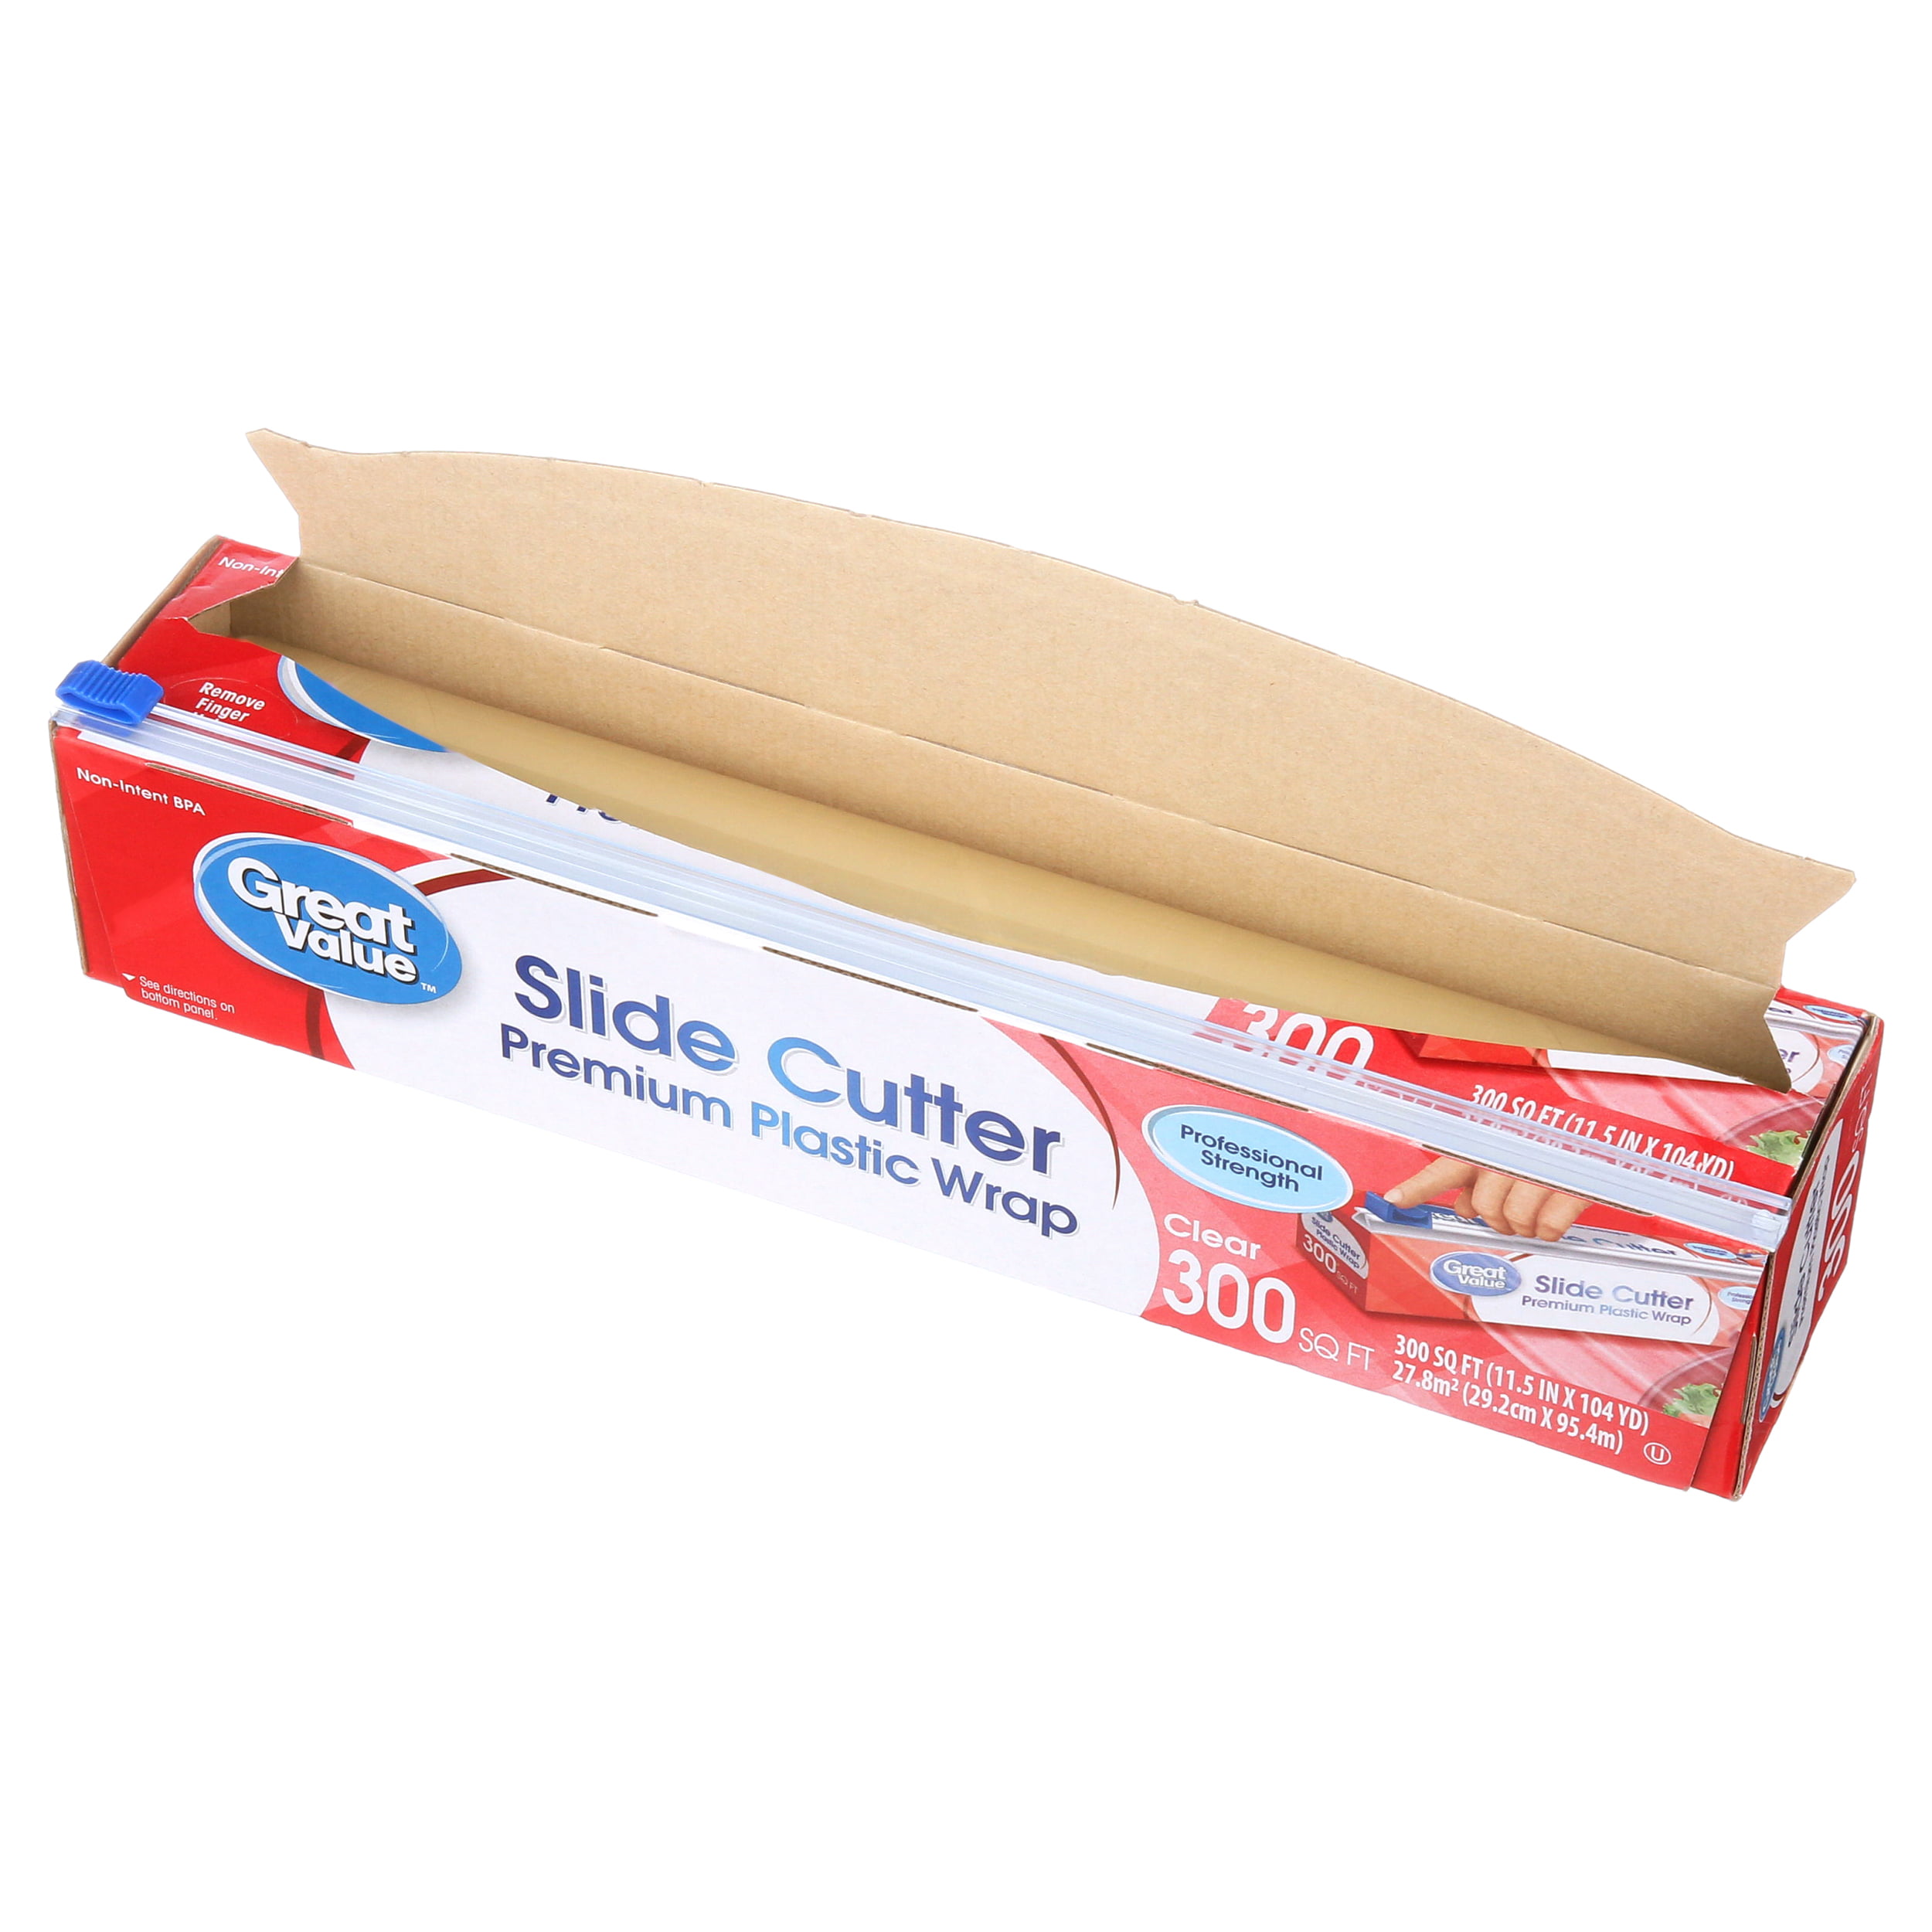 1 x Roll Catering Cling Film Cutter Box 30cm x 300m Great Value Caterwrap Cheap 